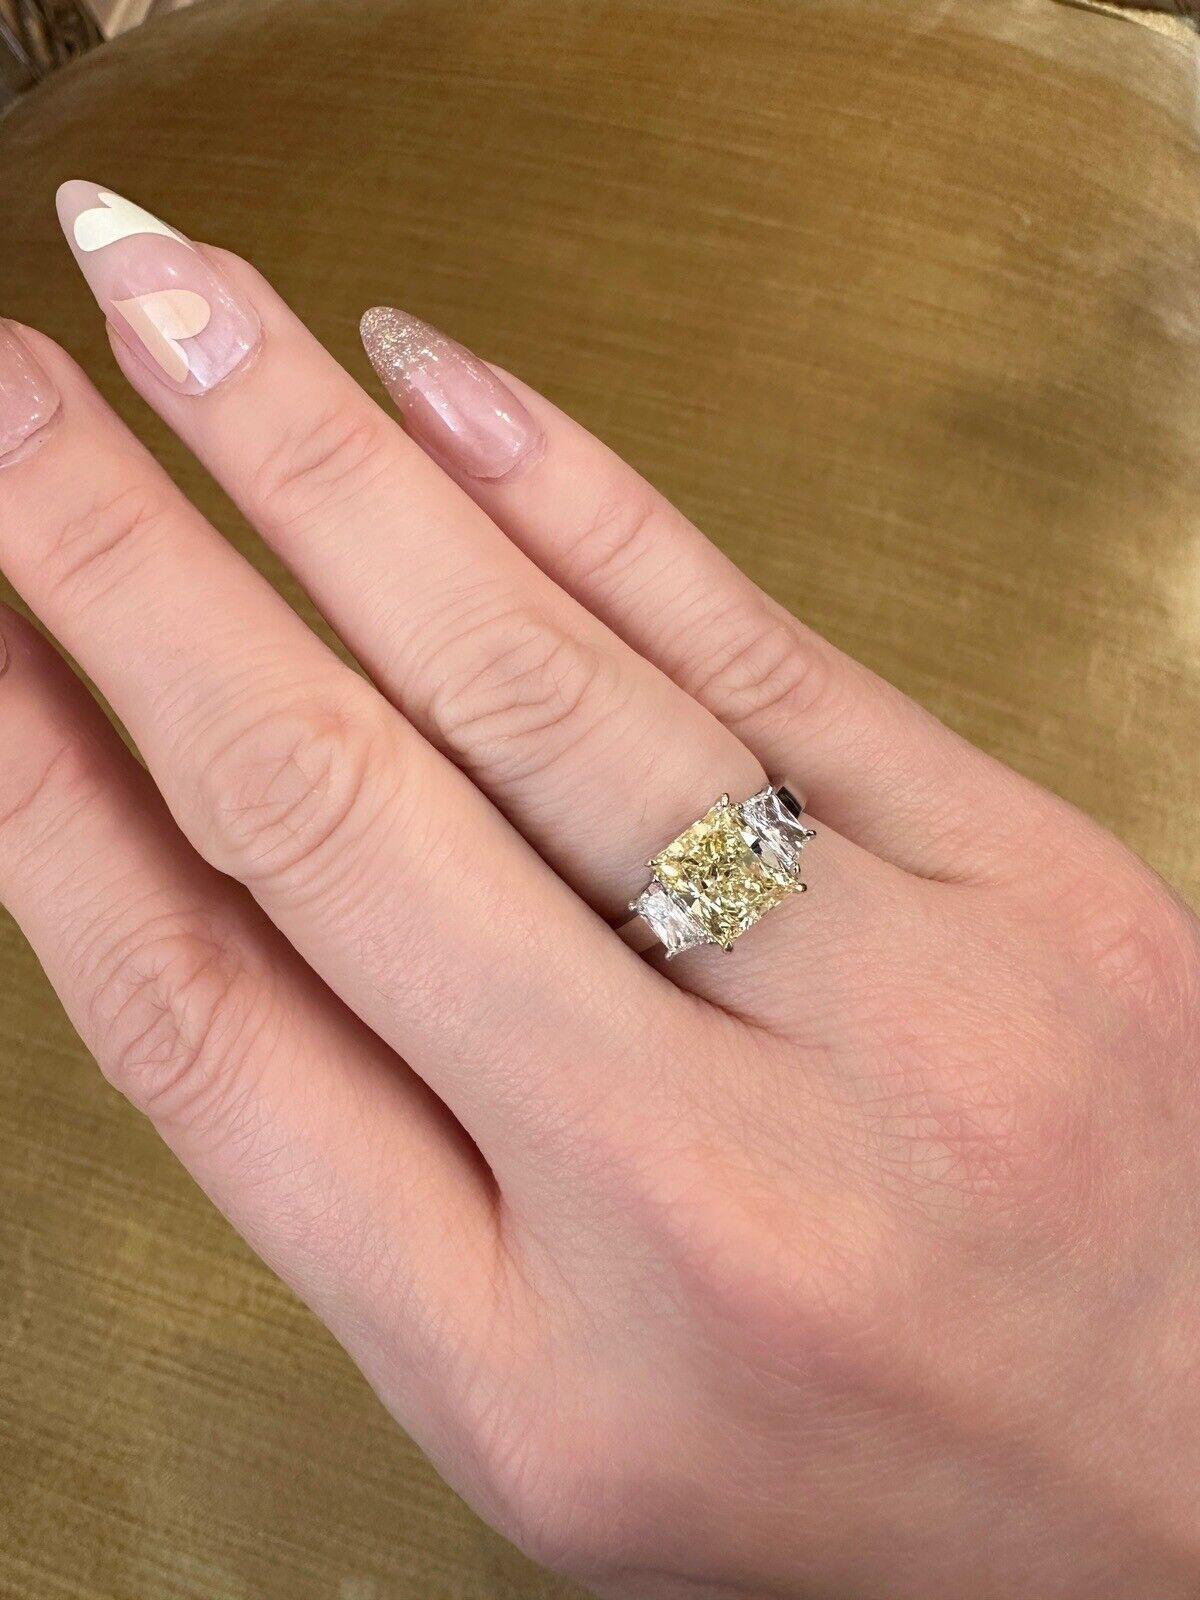 GIA Natural Fancy Yellow Diamond 2.31 carat with Side Diamonds in Platinum

Fancy Yellow Diamond Ring features a 2.31 carat Natural Fancy Yellow Diamond with a Rectangular Modified Brilliant-cut in the center, accented by two Trapezoid-shaped White